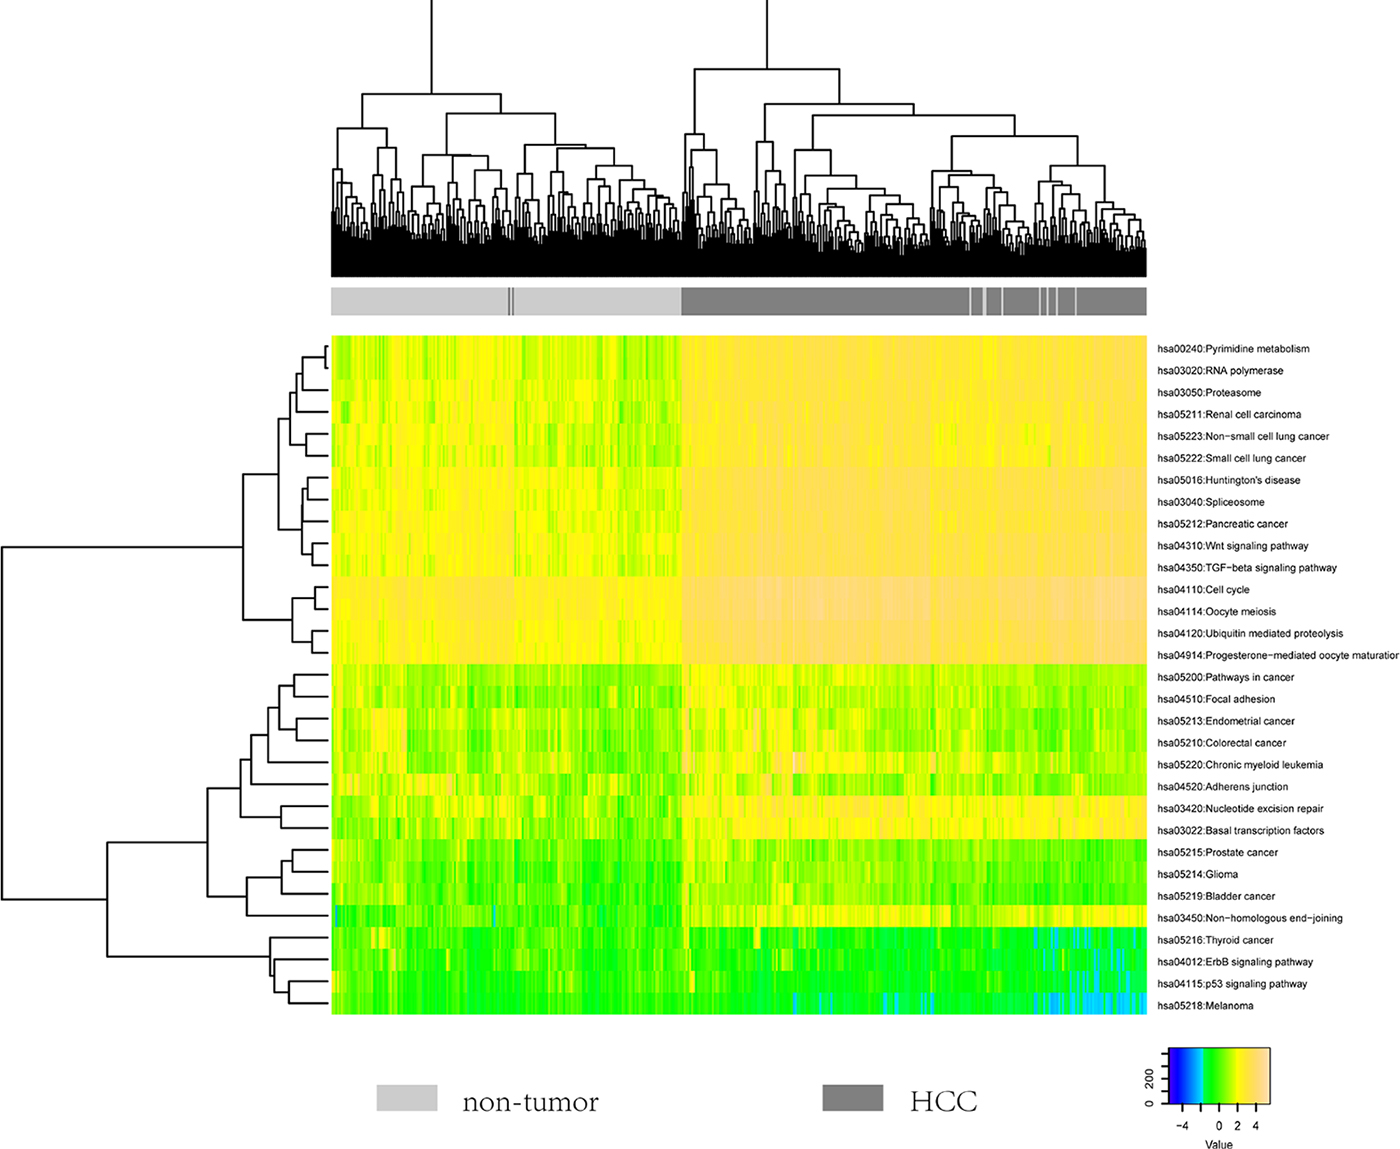 The heatmap showing the hierarchical clustering of all samples using the scores of 31 identified pathways.